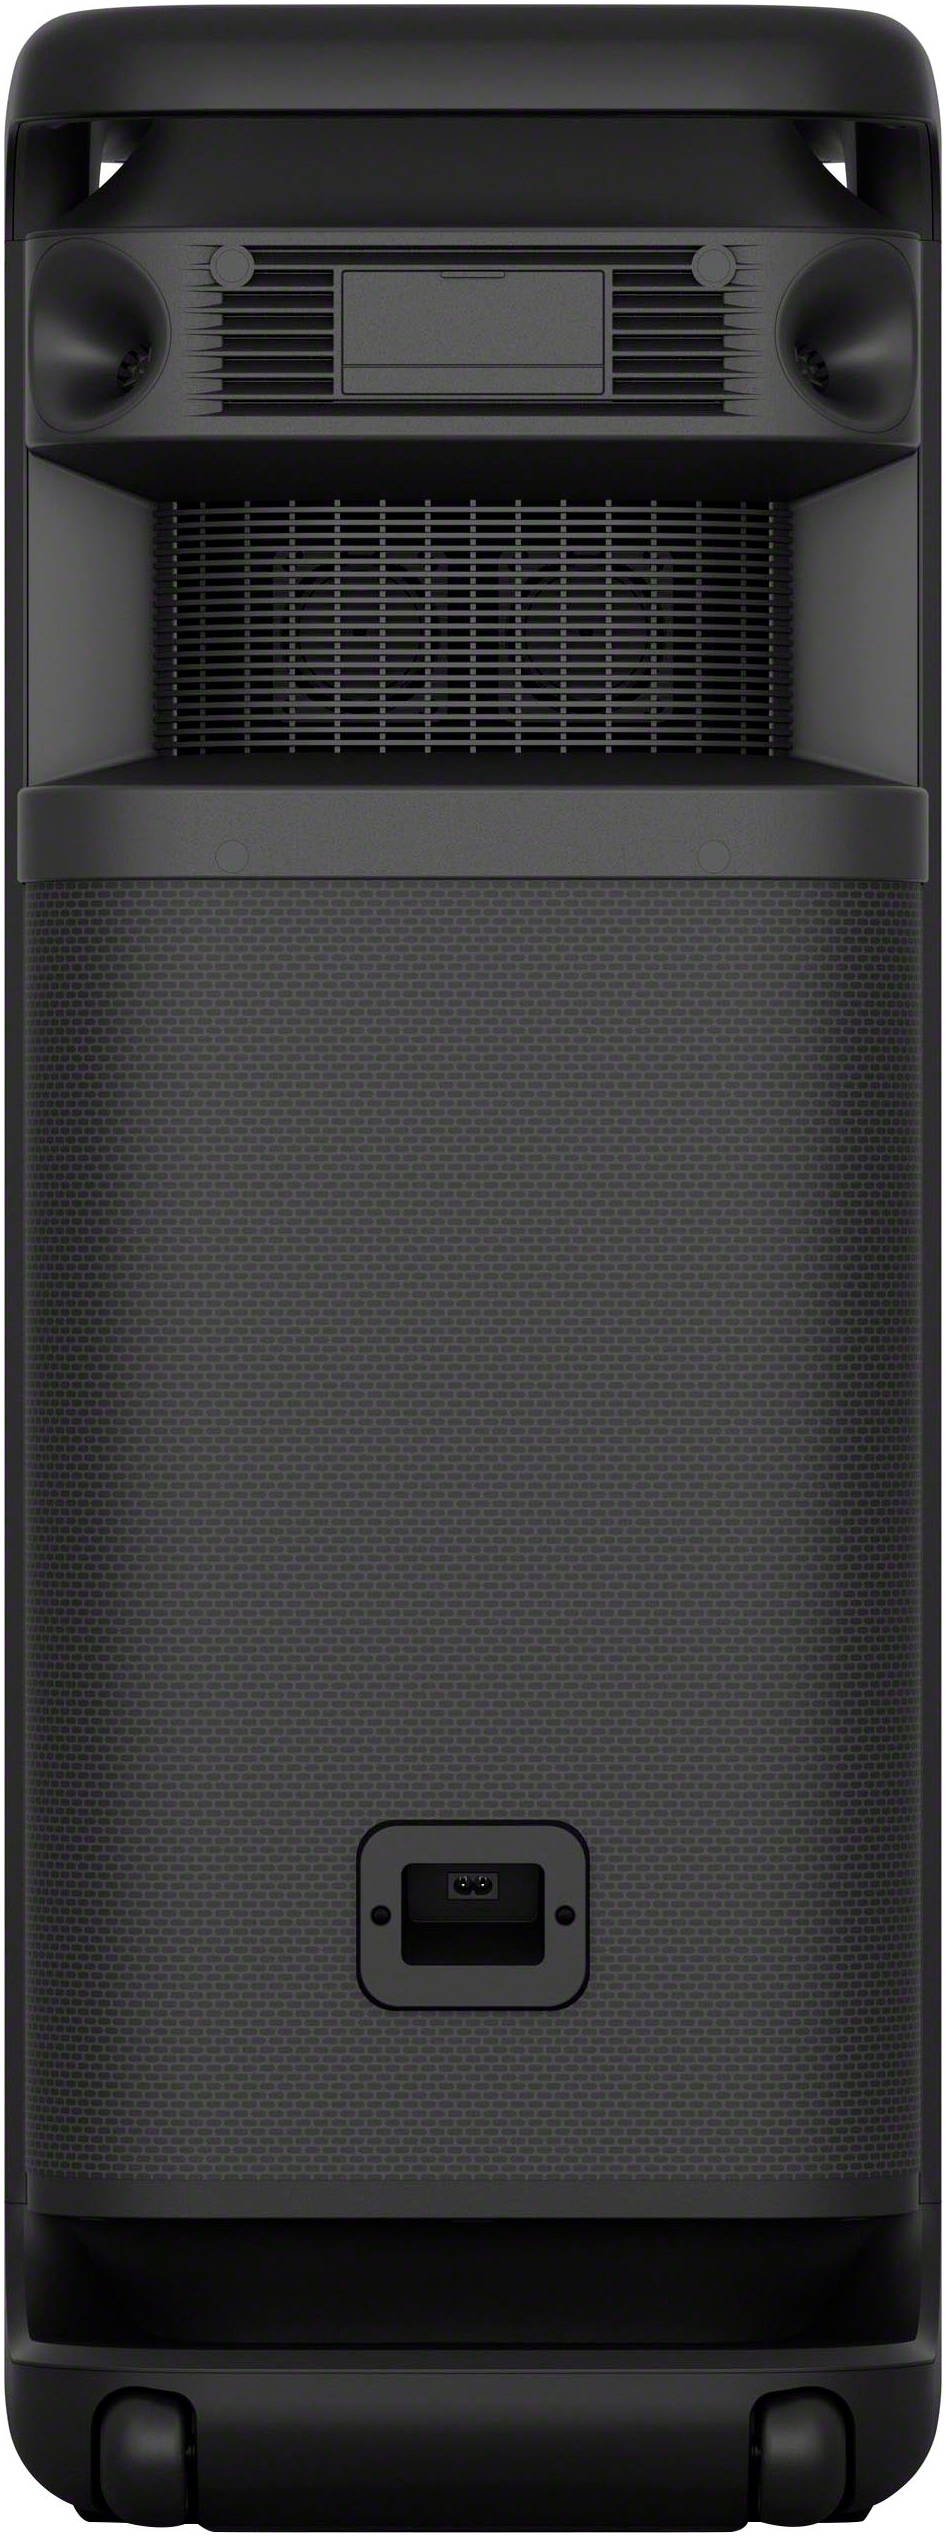 Sony Bluetooth-Speaker »ULT TOWER 10«, ultimativem tiefen Bass, X-Balanced Speakers, 360-LED-Beleuchtung